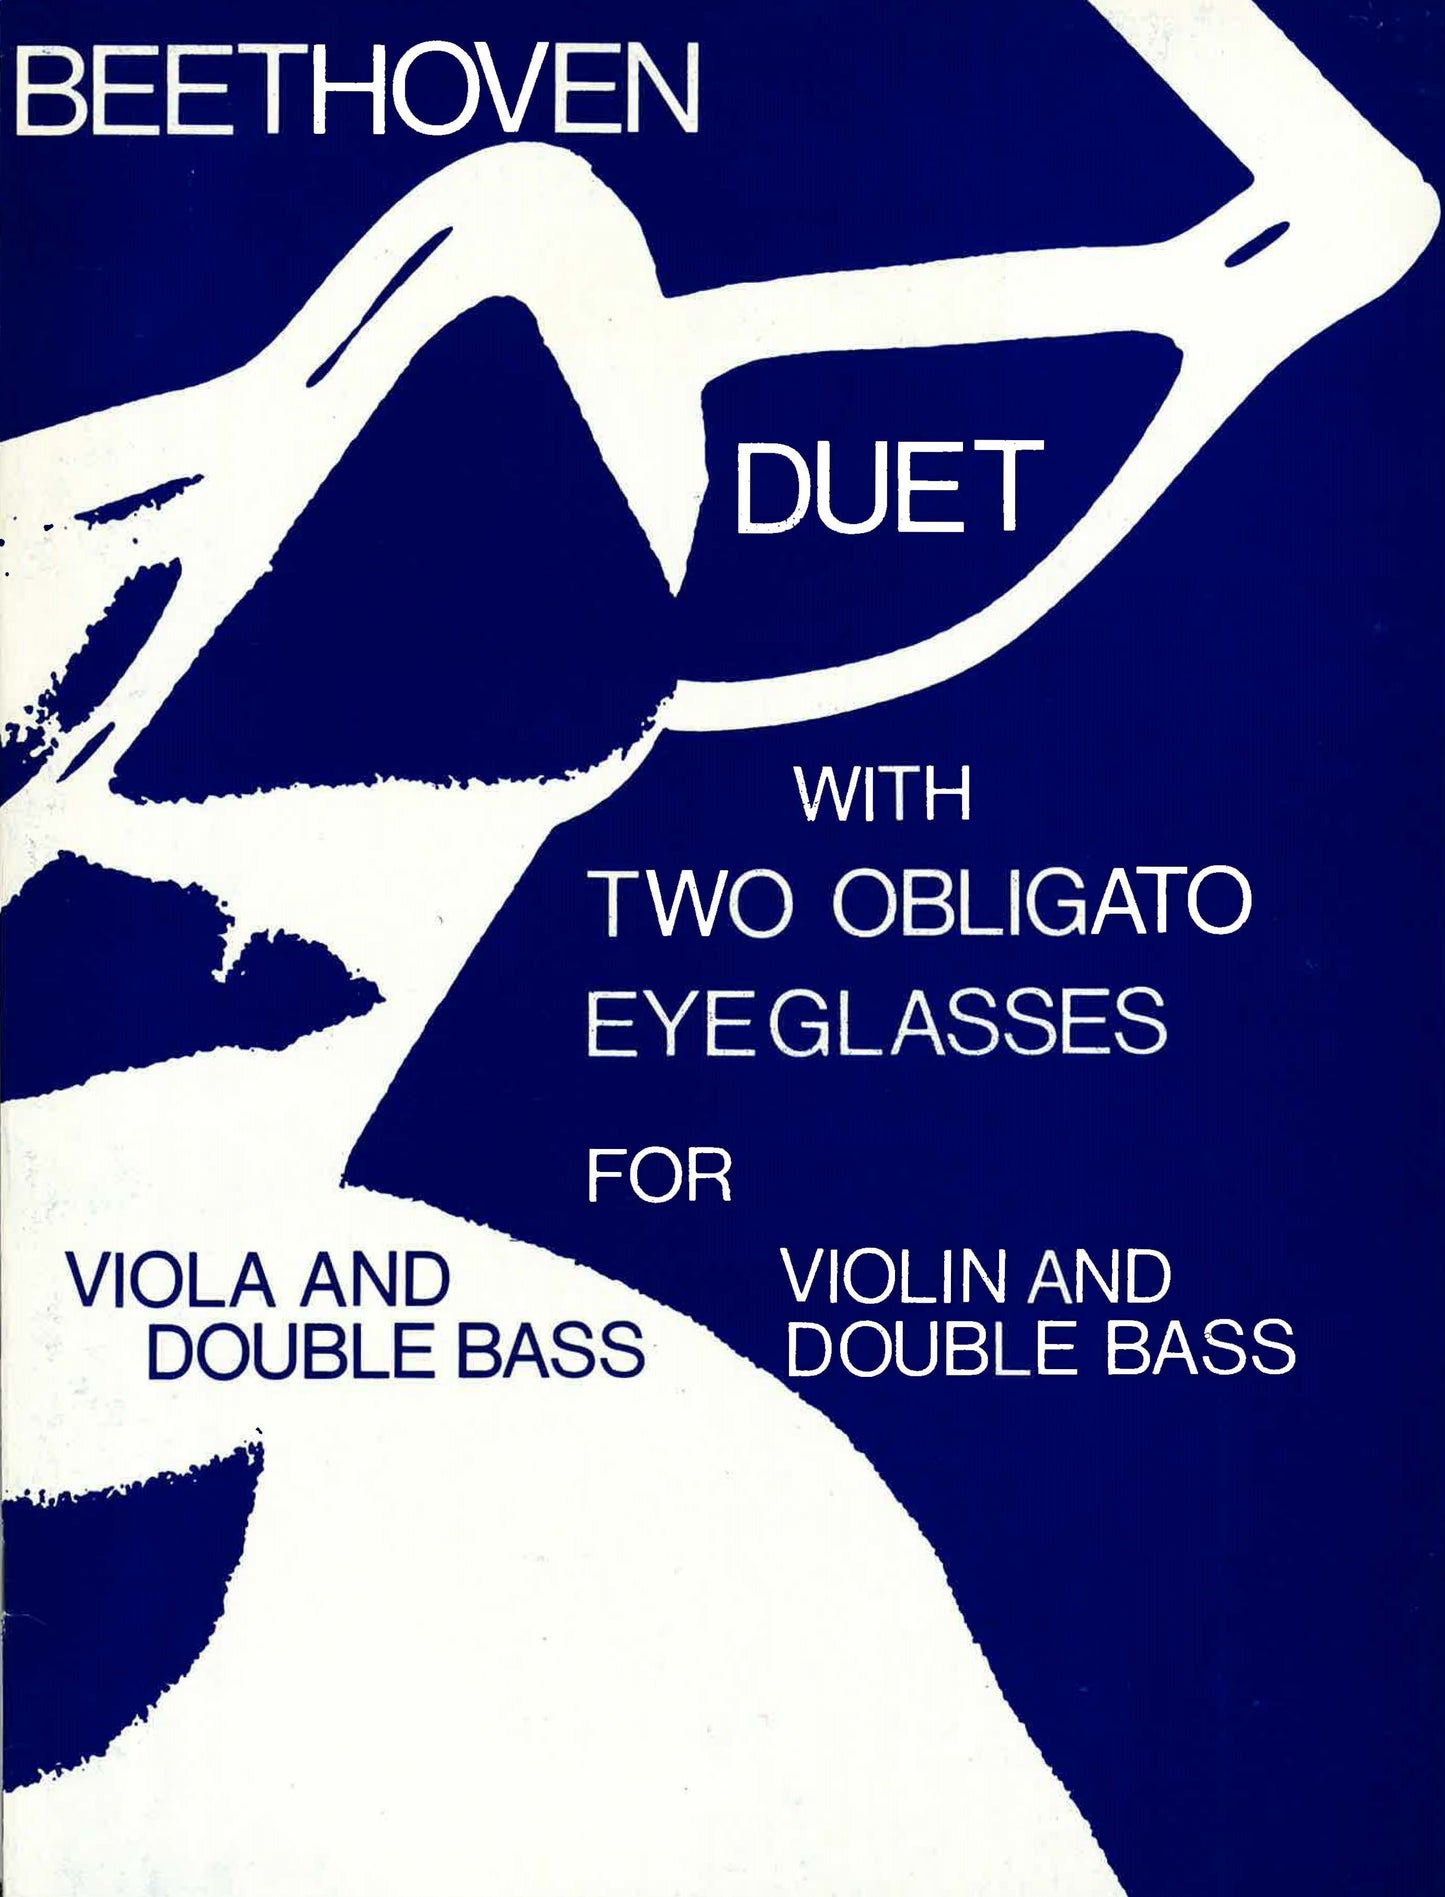 Beethoven: Duet with Two Obligato Eyeglasses